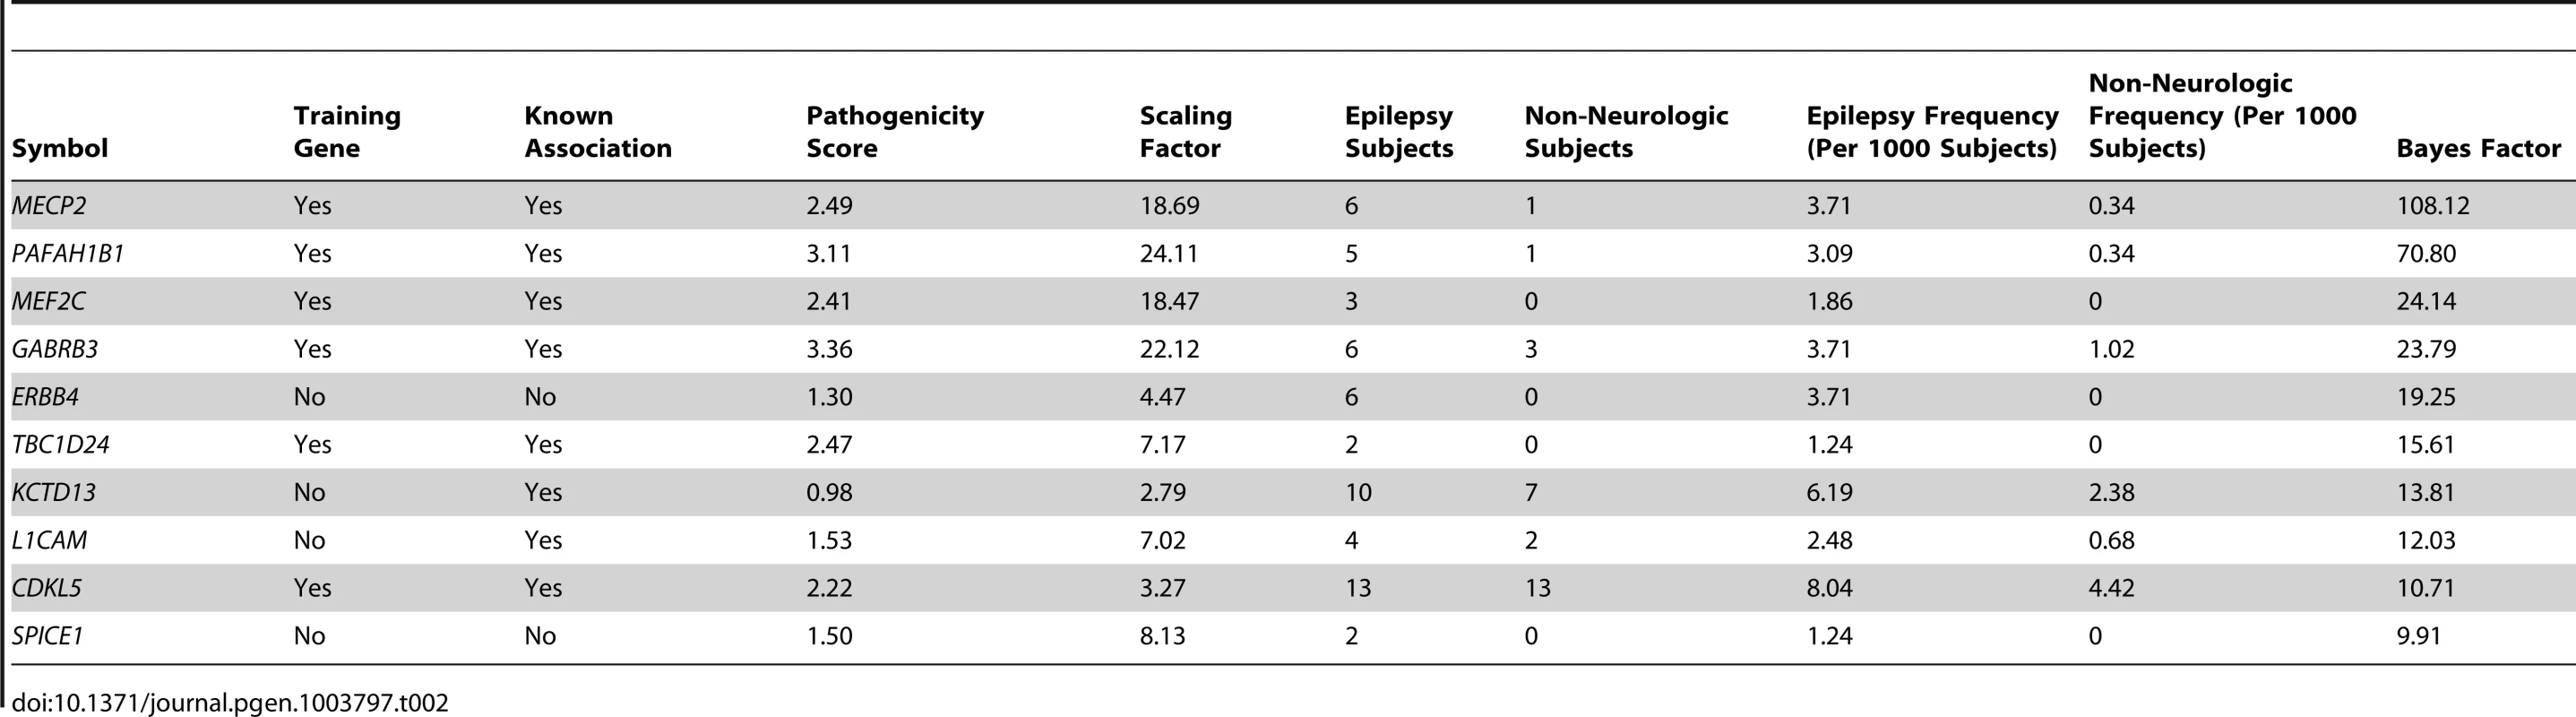 Top ten loci ranked by Bayes factor.